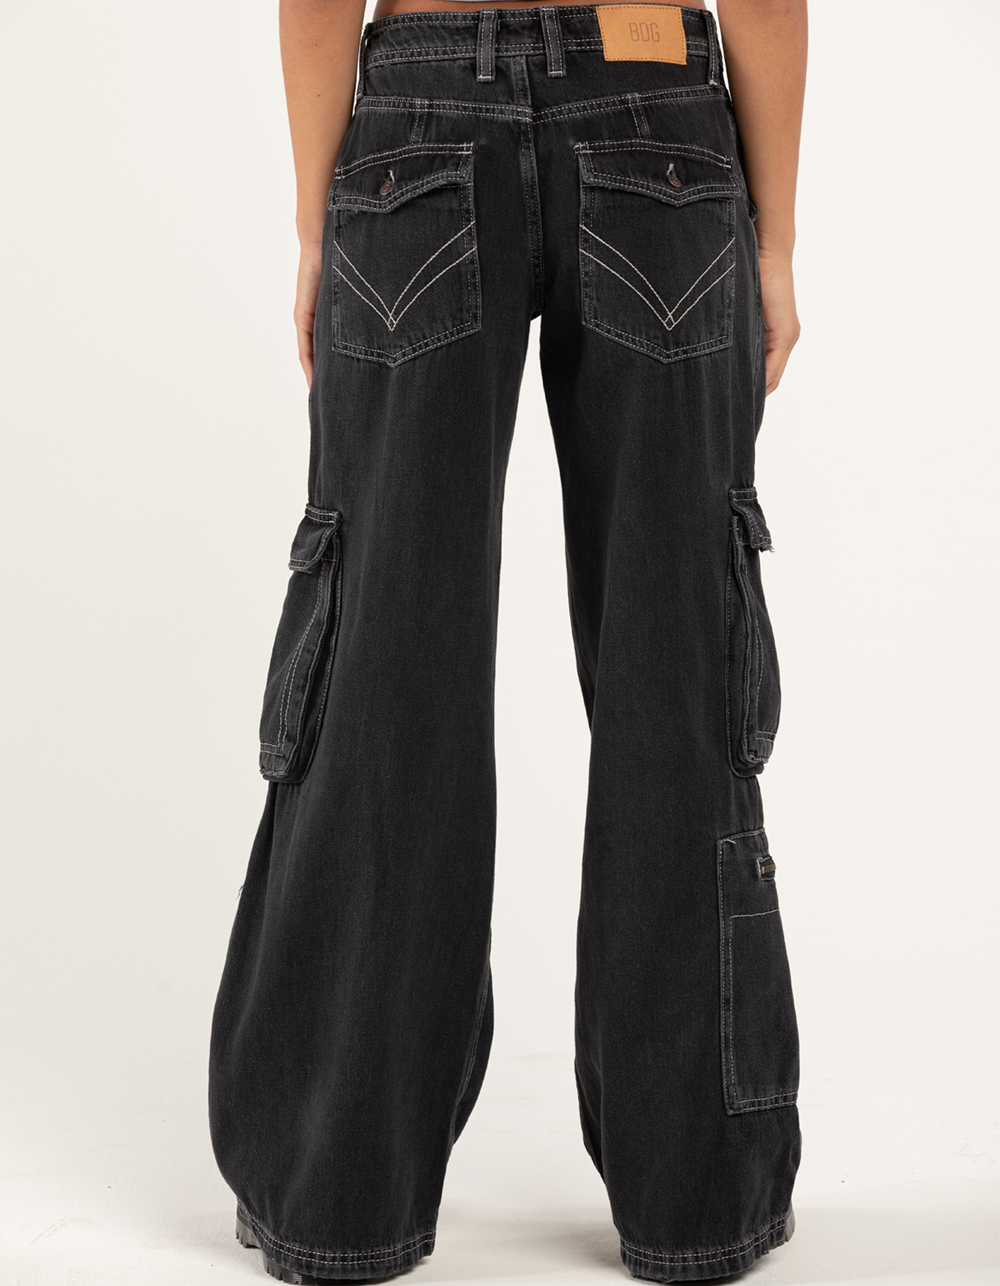 BDG Urban Outfitters Womens Cargo Puddle Pants